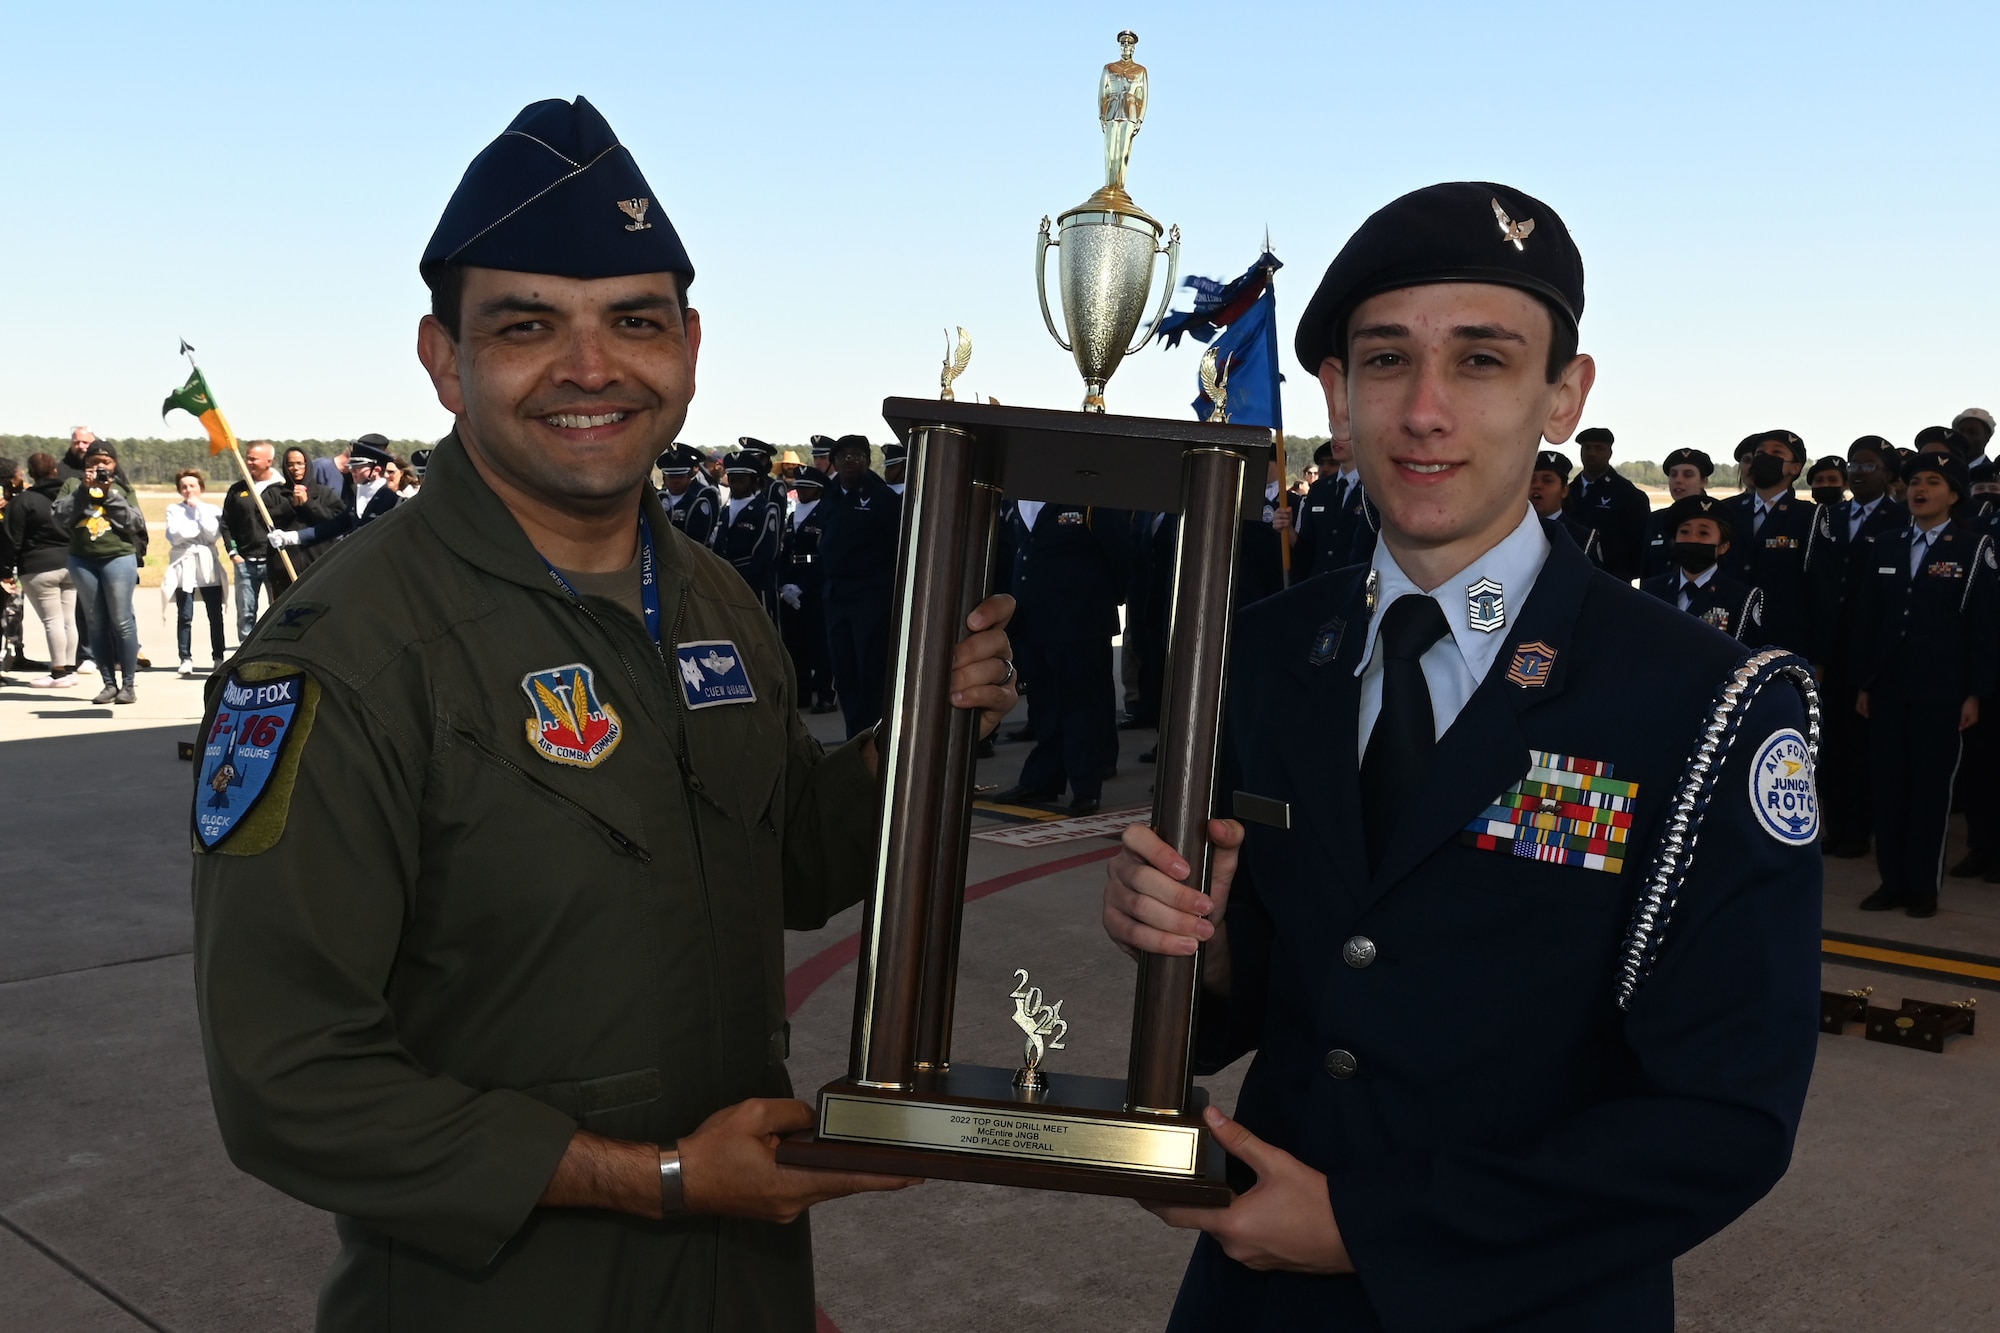 U.S. Air Force Col. Quaid Quadri, 169th Fighter Wing commander, presents the second overall trophy for the competition to Fort Dorchester High School during the annual Top Gun Drill Meet at McEntire Joint National Guard Base, South Carolina, March 26, 2022. High School Junior Reserve Officers Training Corps cadets from twenty high schools from across the state competed in twelve drill and ceremony events sponsored by the South Carolina Air National Guard. (U.S. Air National Guard photo by Senior Master Sgt. Edward Snyder)